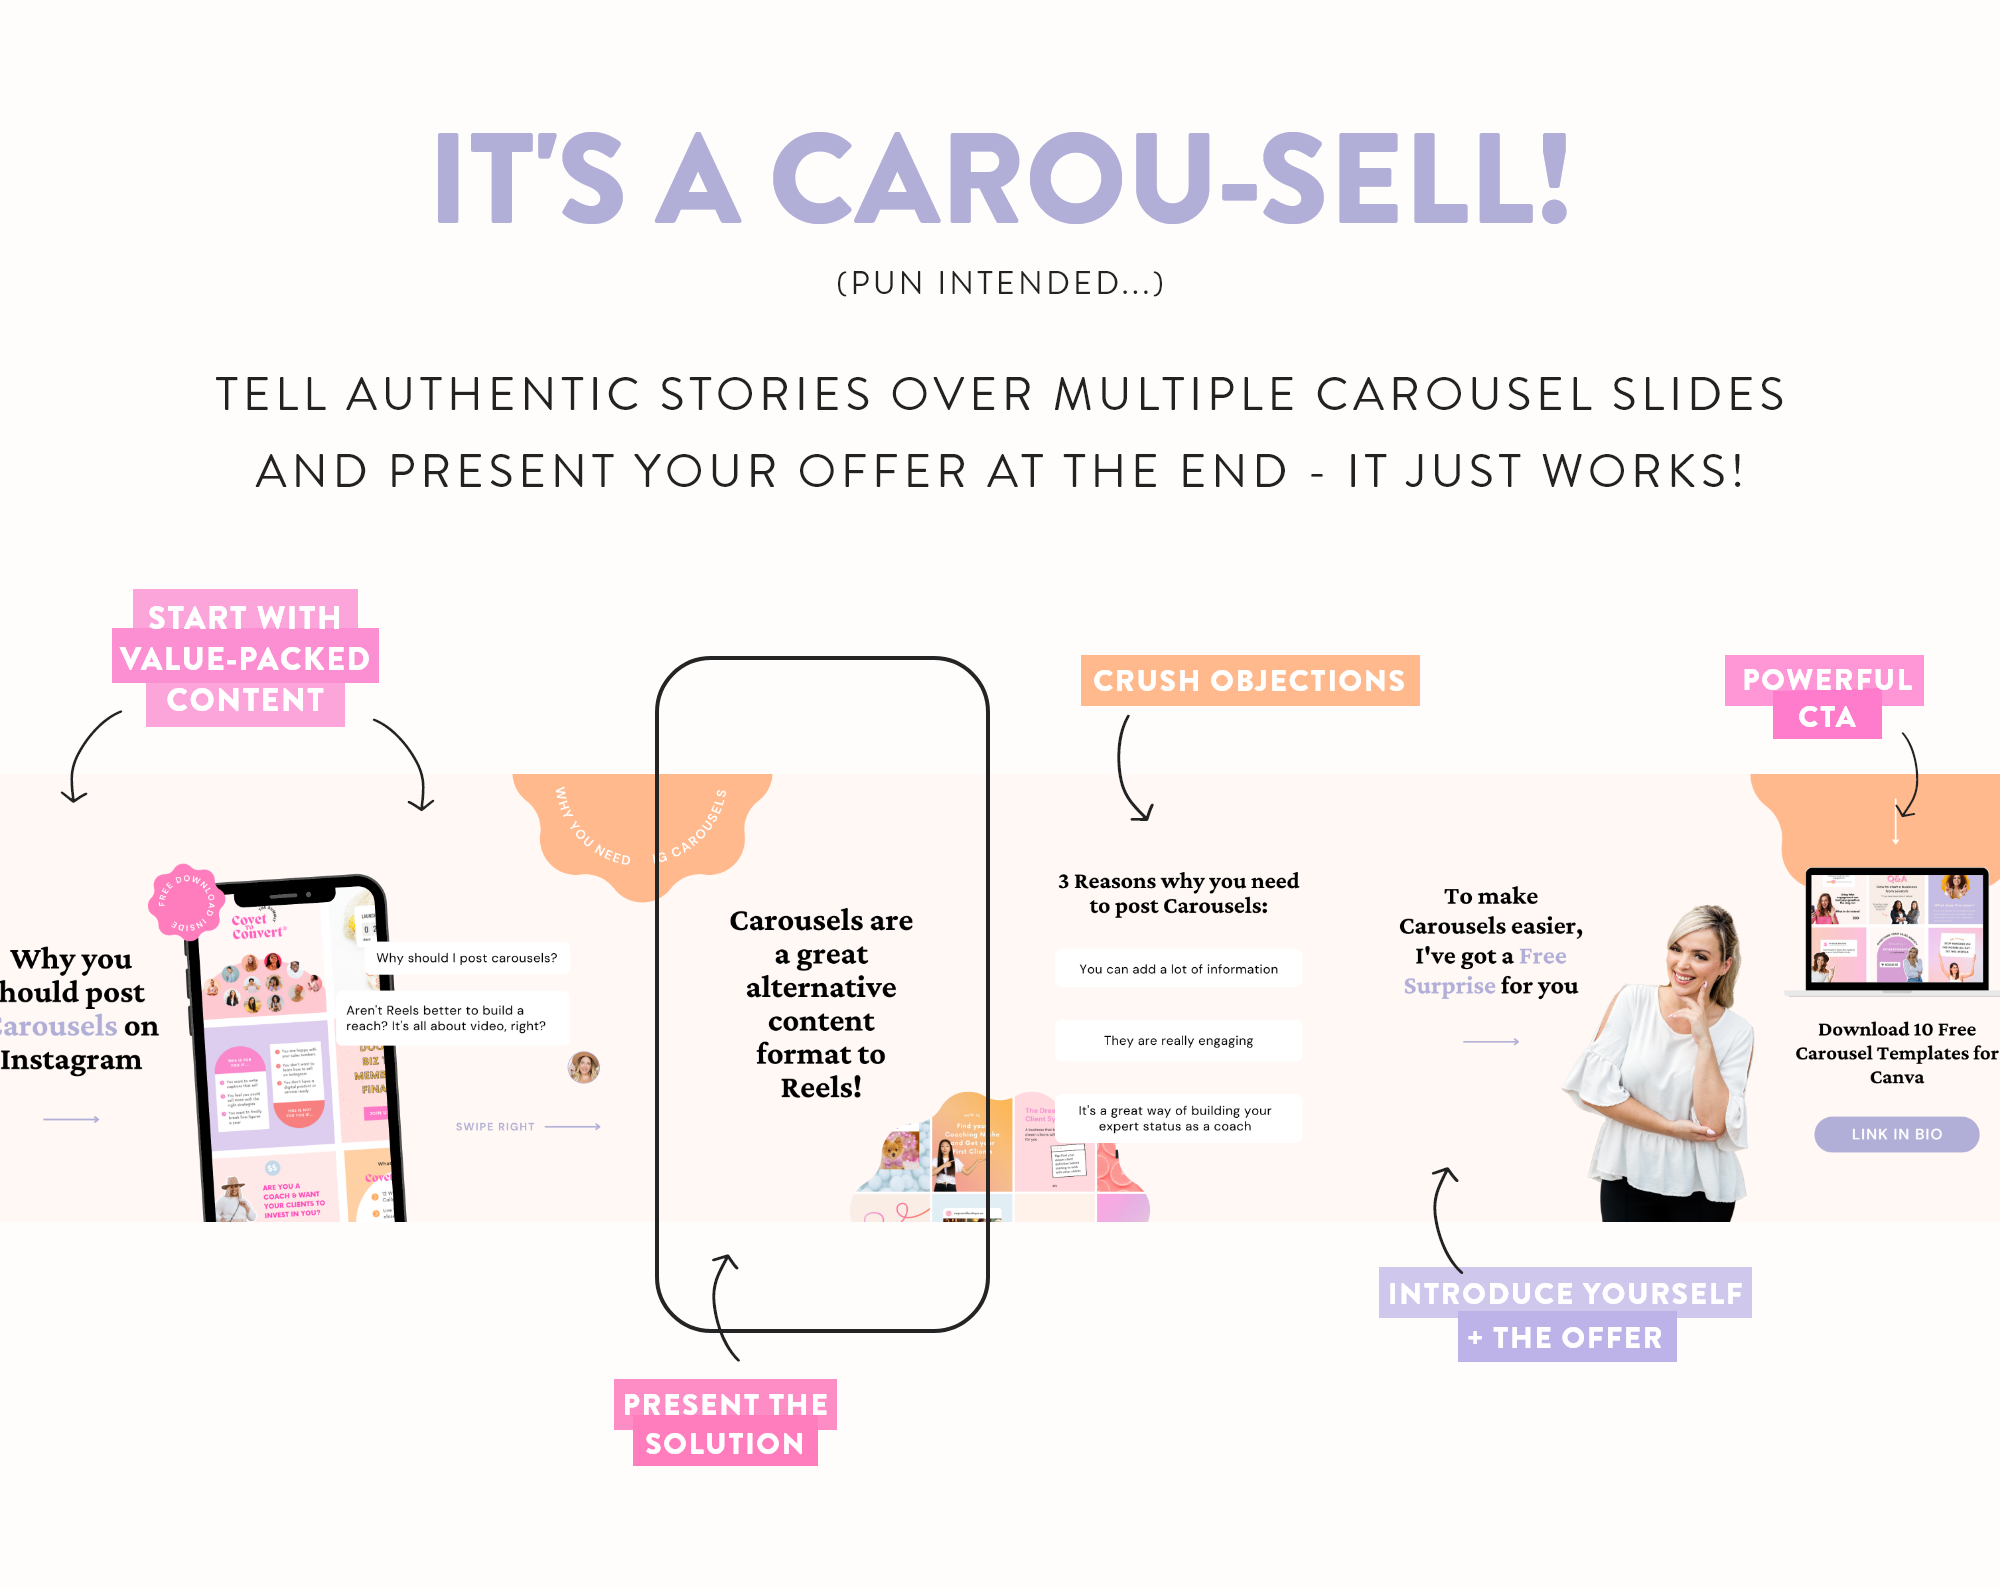 seamlessn-instagram-engagement-carousel-templates-for-canva-sell-4